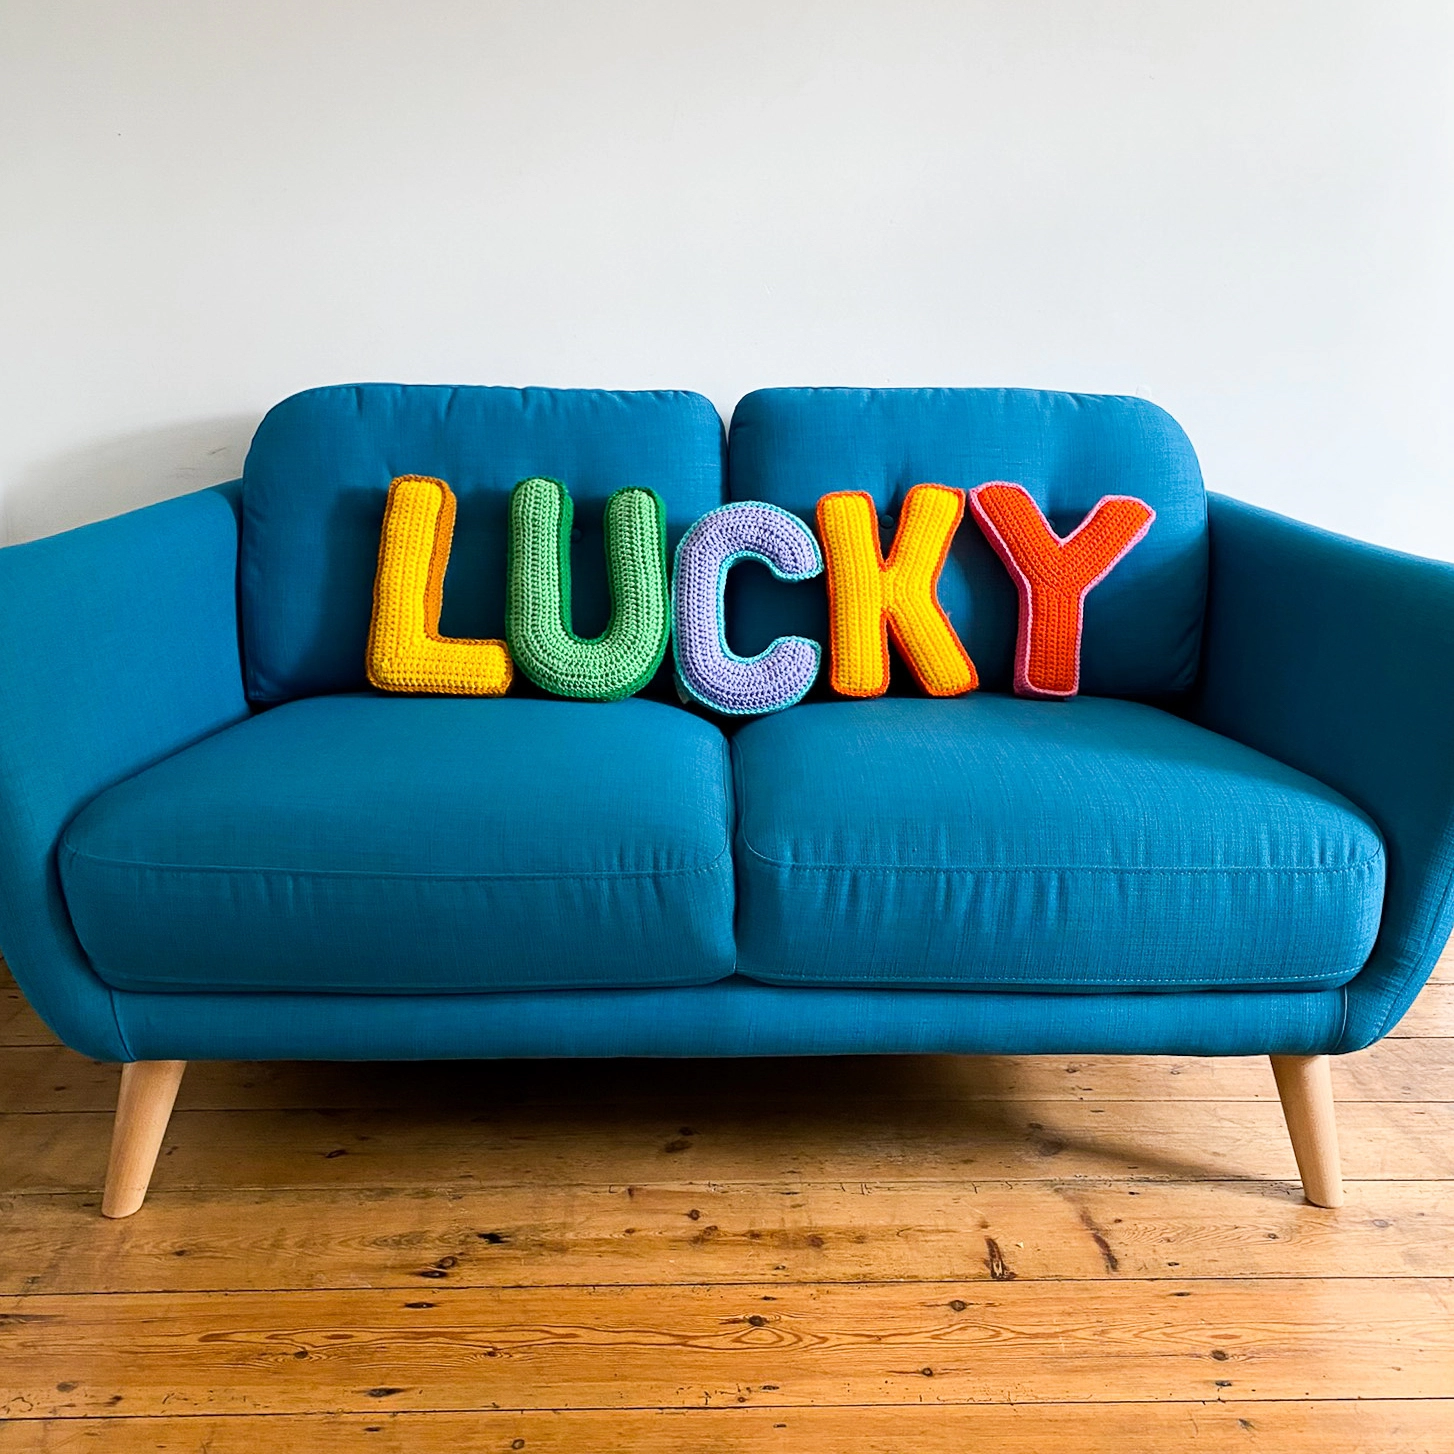 Crochet Letter cushions spelling out LUCKY on a sofa